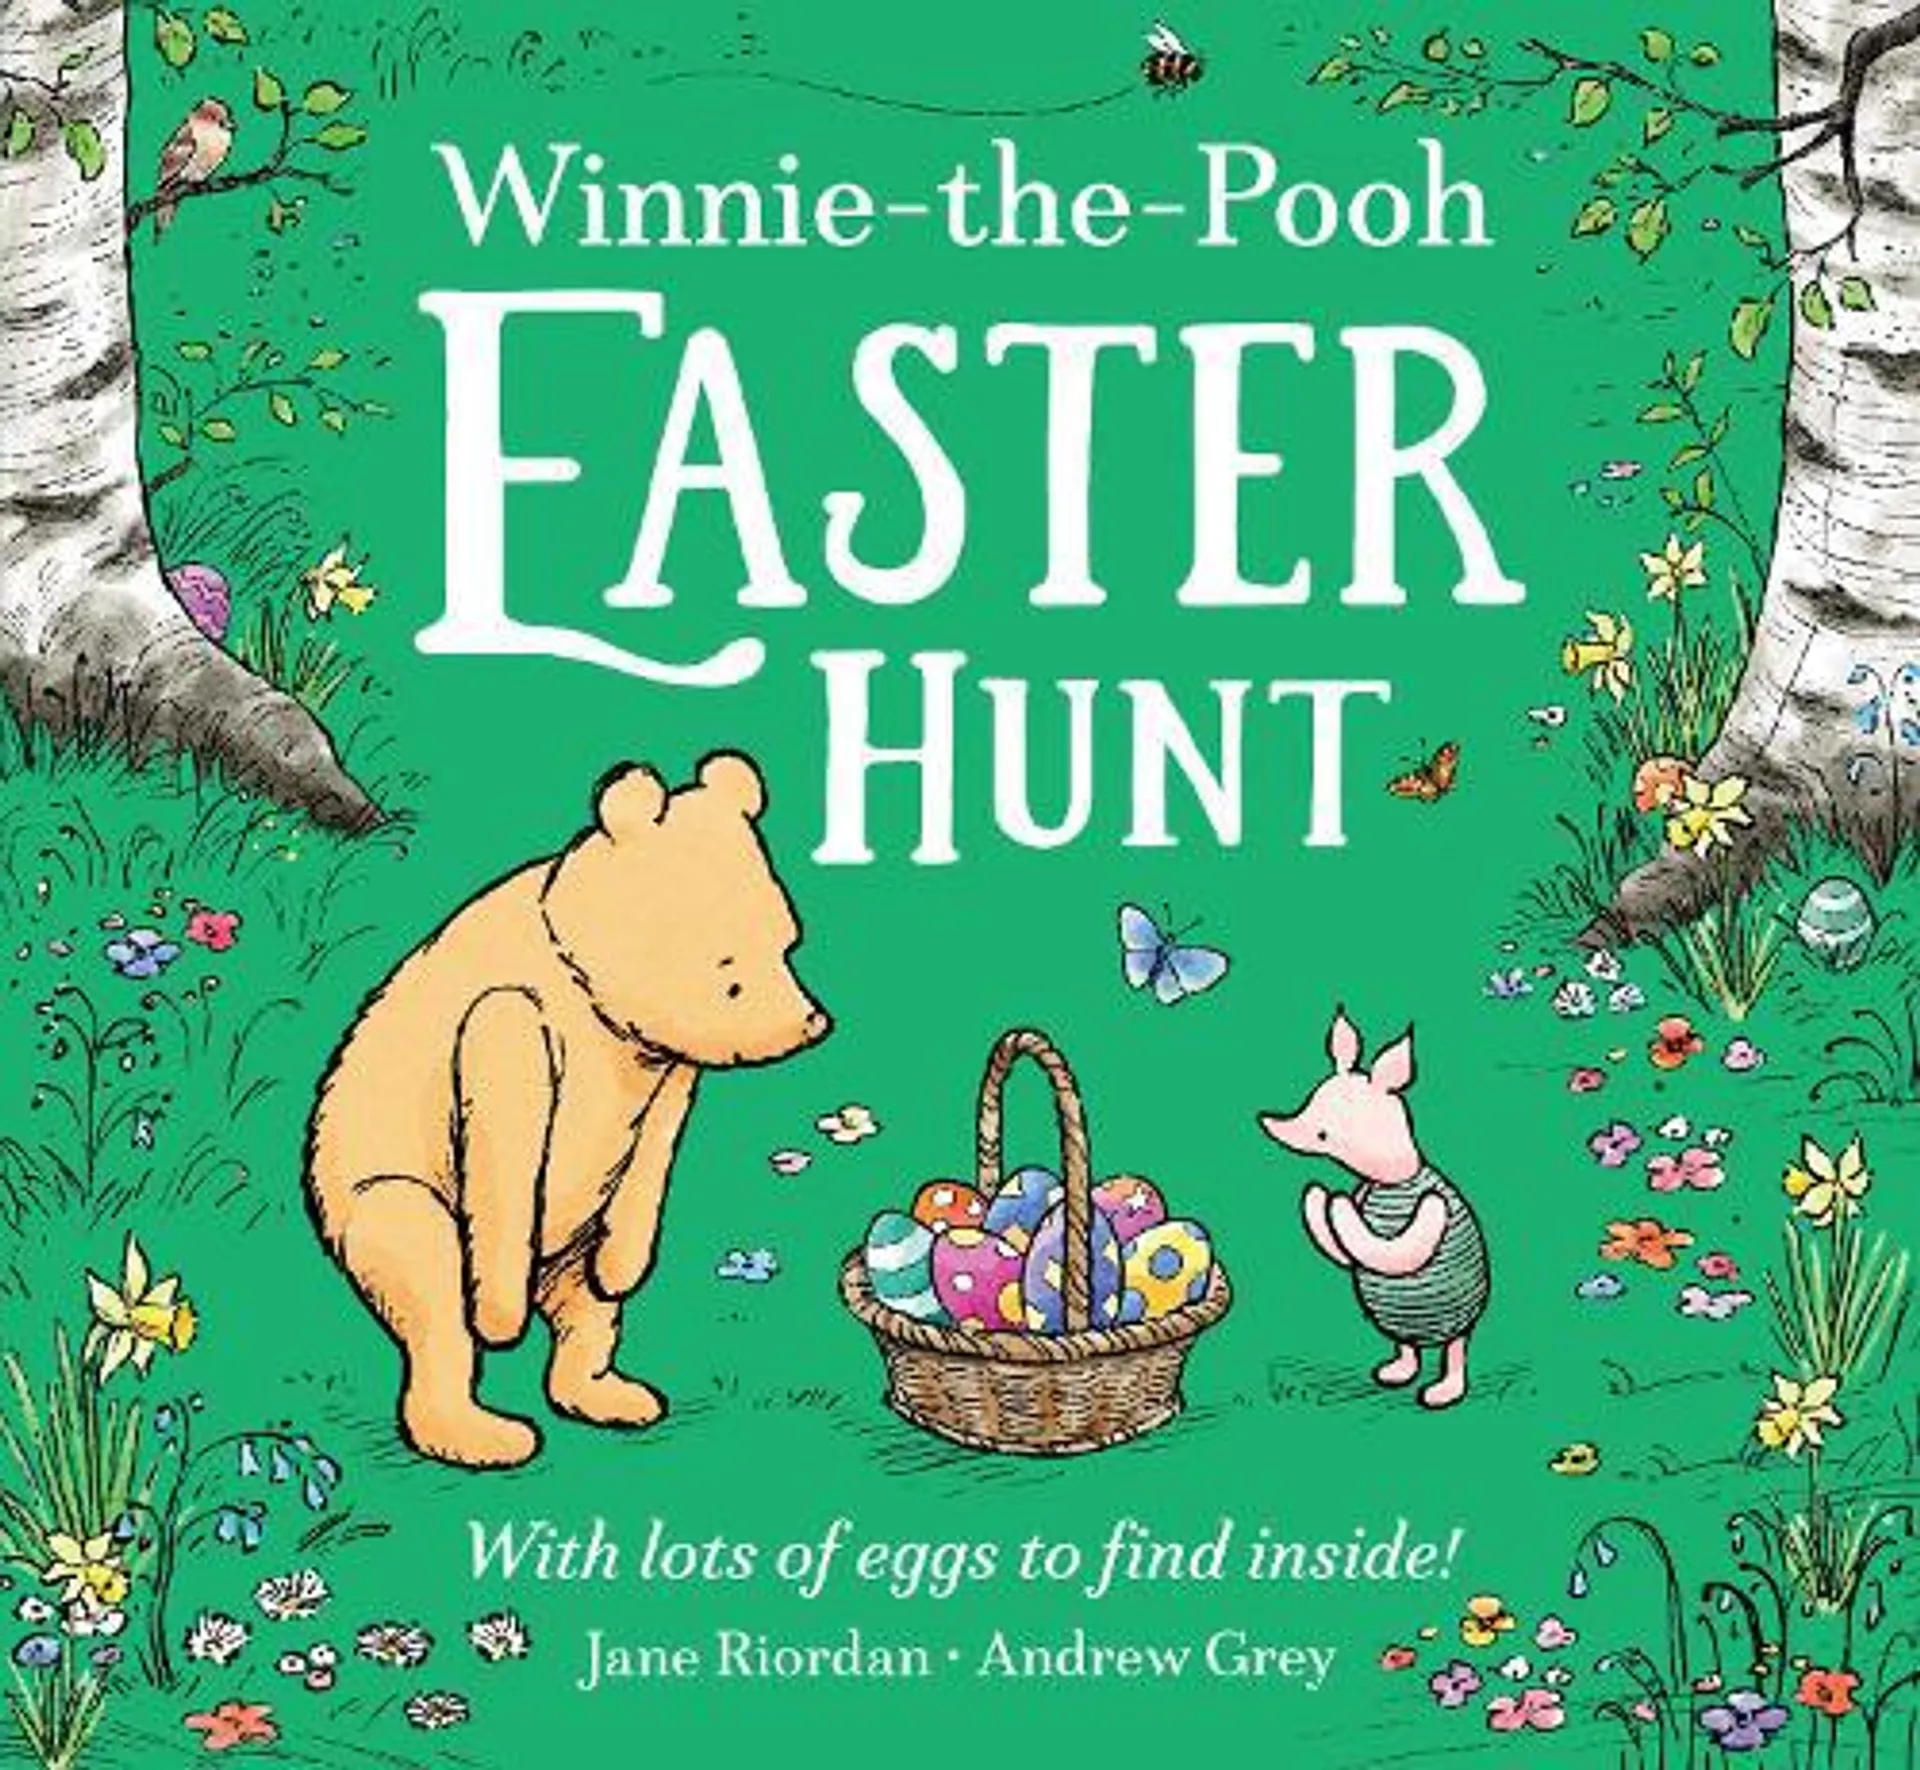 Winnie-the-Pooh Easter Hunt: With Lots of Eggs to Find Inside! (Paperback)